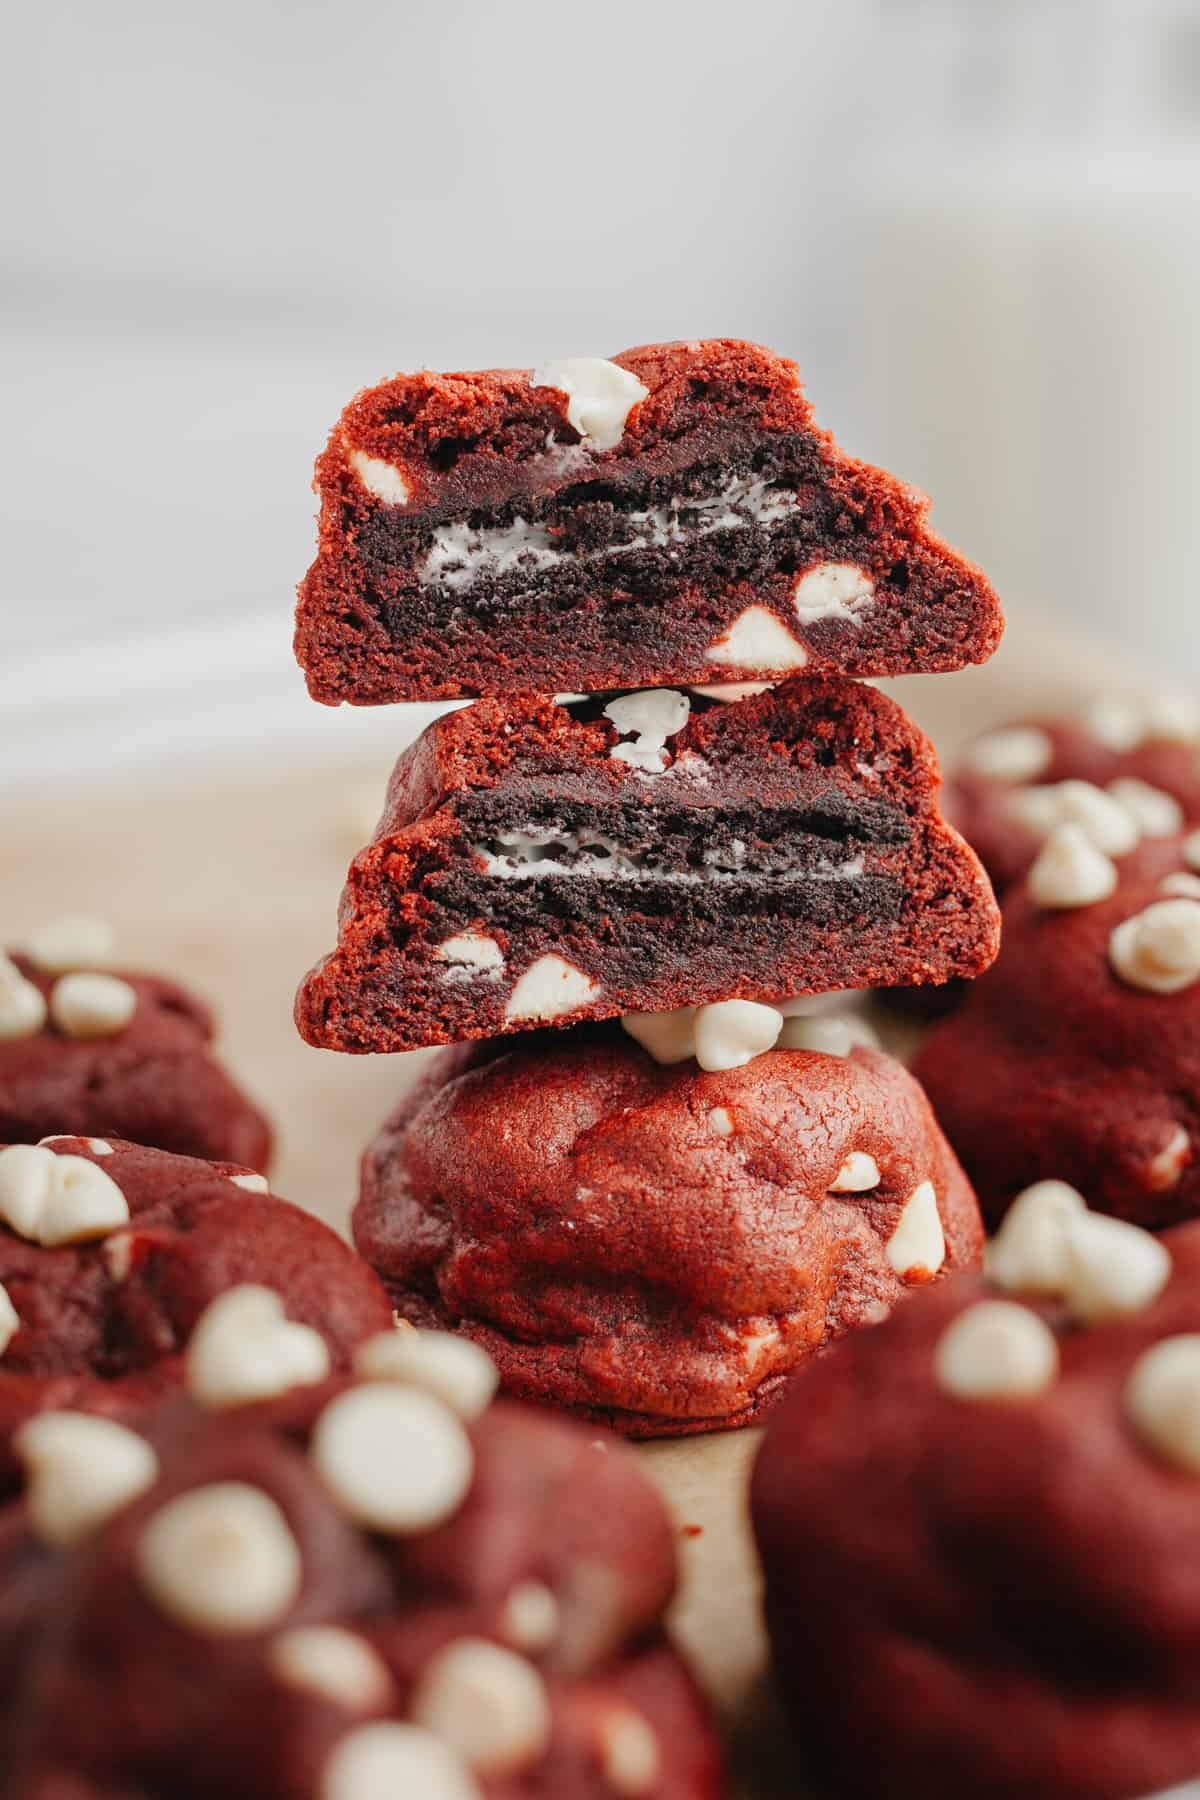 A stack of three red velvet cookies, they are cut in half showing they are stuffed with an Oreo.